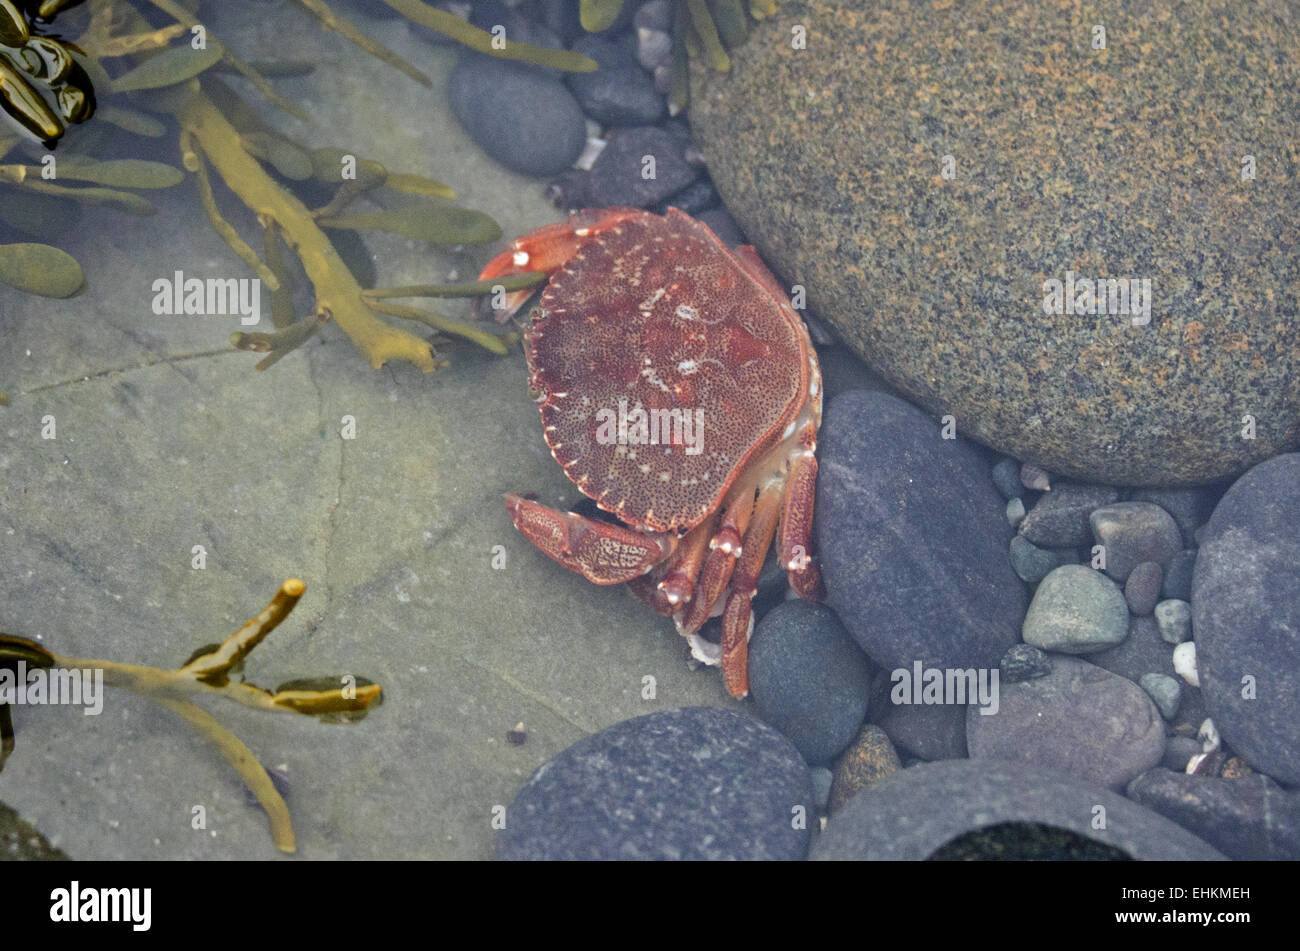 A Rock Crab (Cancer irroratus) looks for a hiding place in a tidepool, Bar Harbor, Maine. Stock Photo